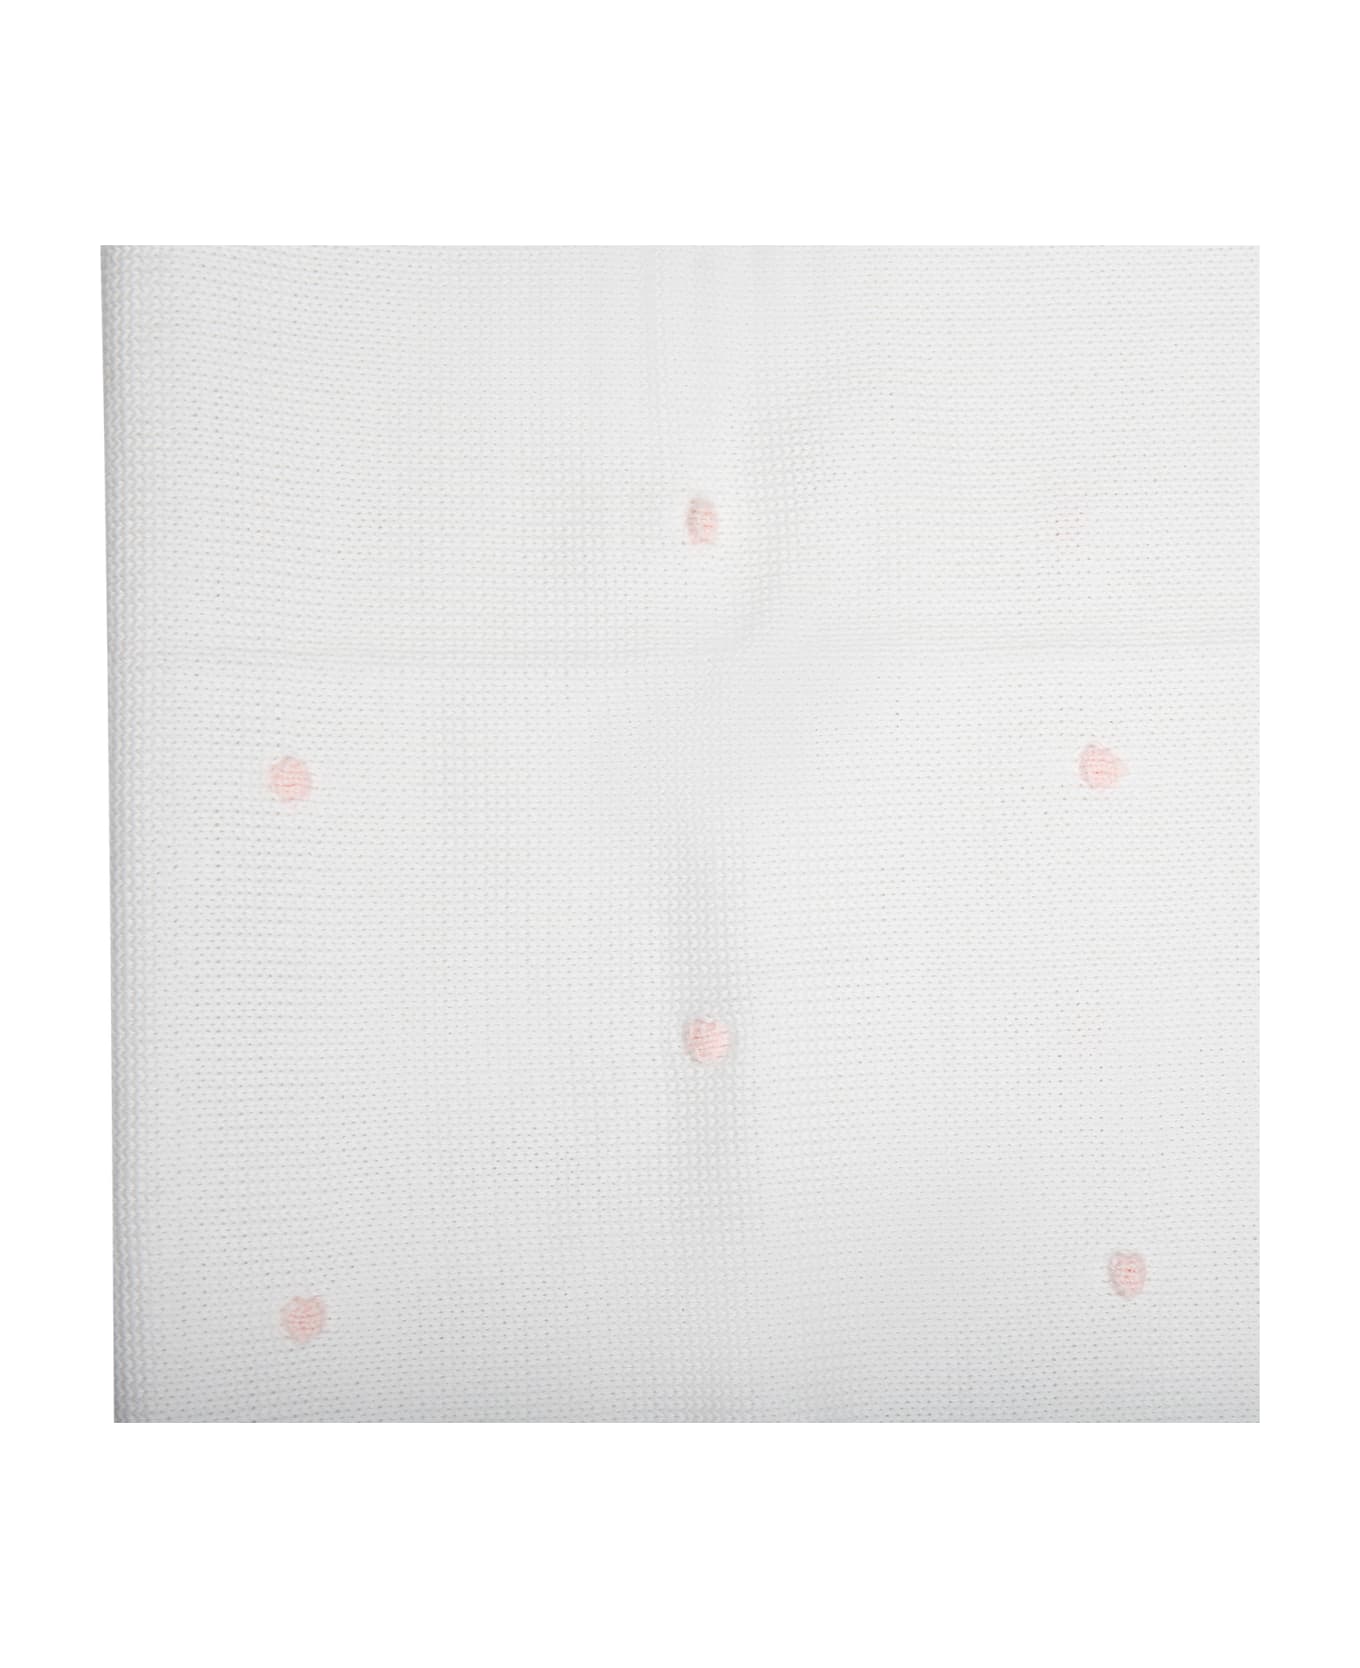 Little Bear White Baby Blanket For Baby Girl With Pink Polka Dots - White アクセサリー＆ギフト